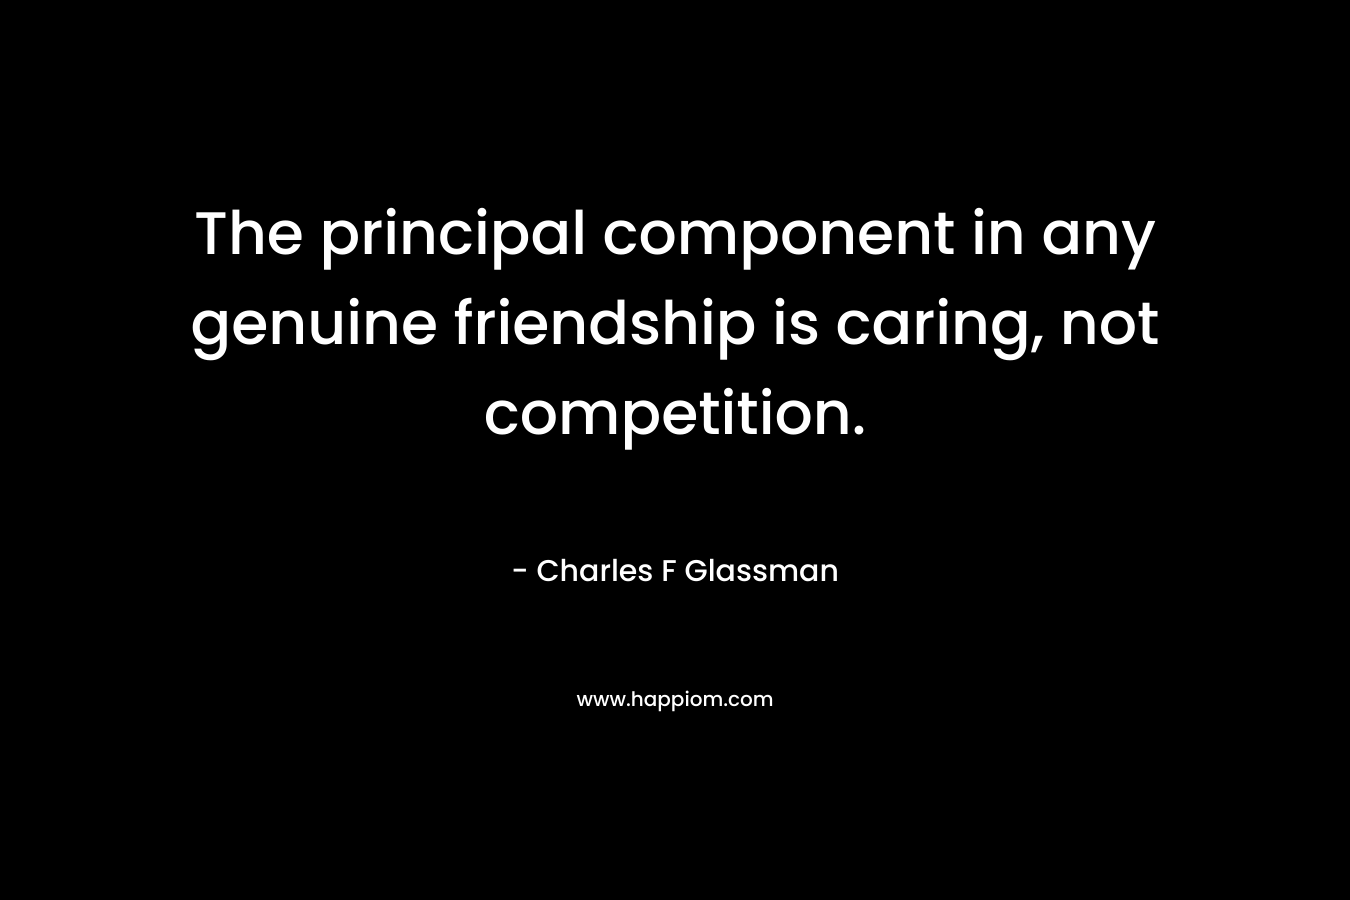 The principal component in any genuine friendship is caring, not competition. – Charles F Glassman